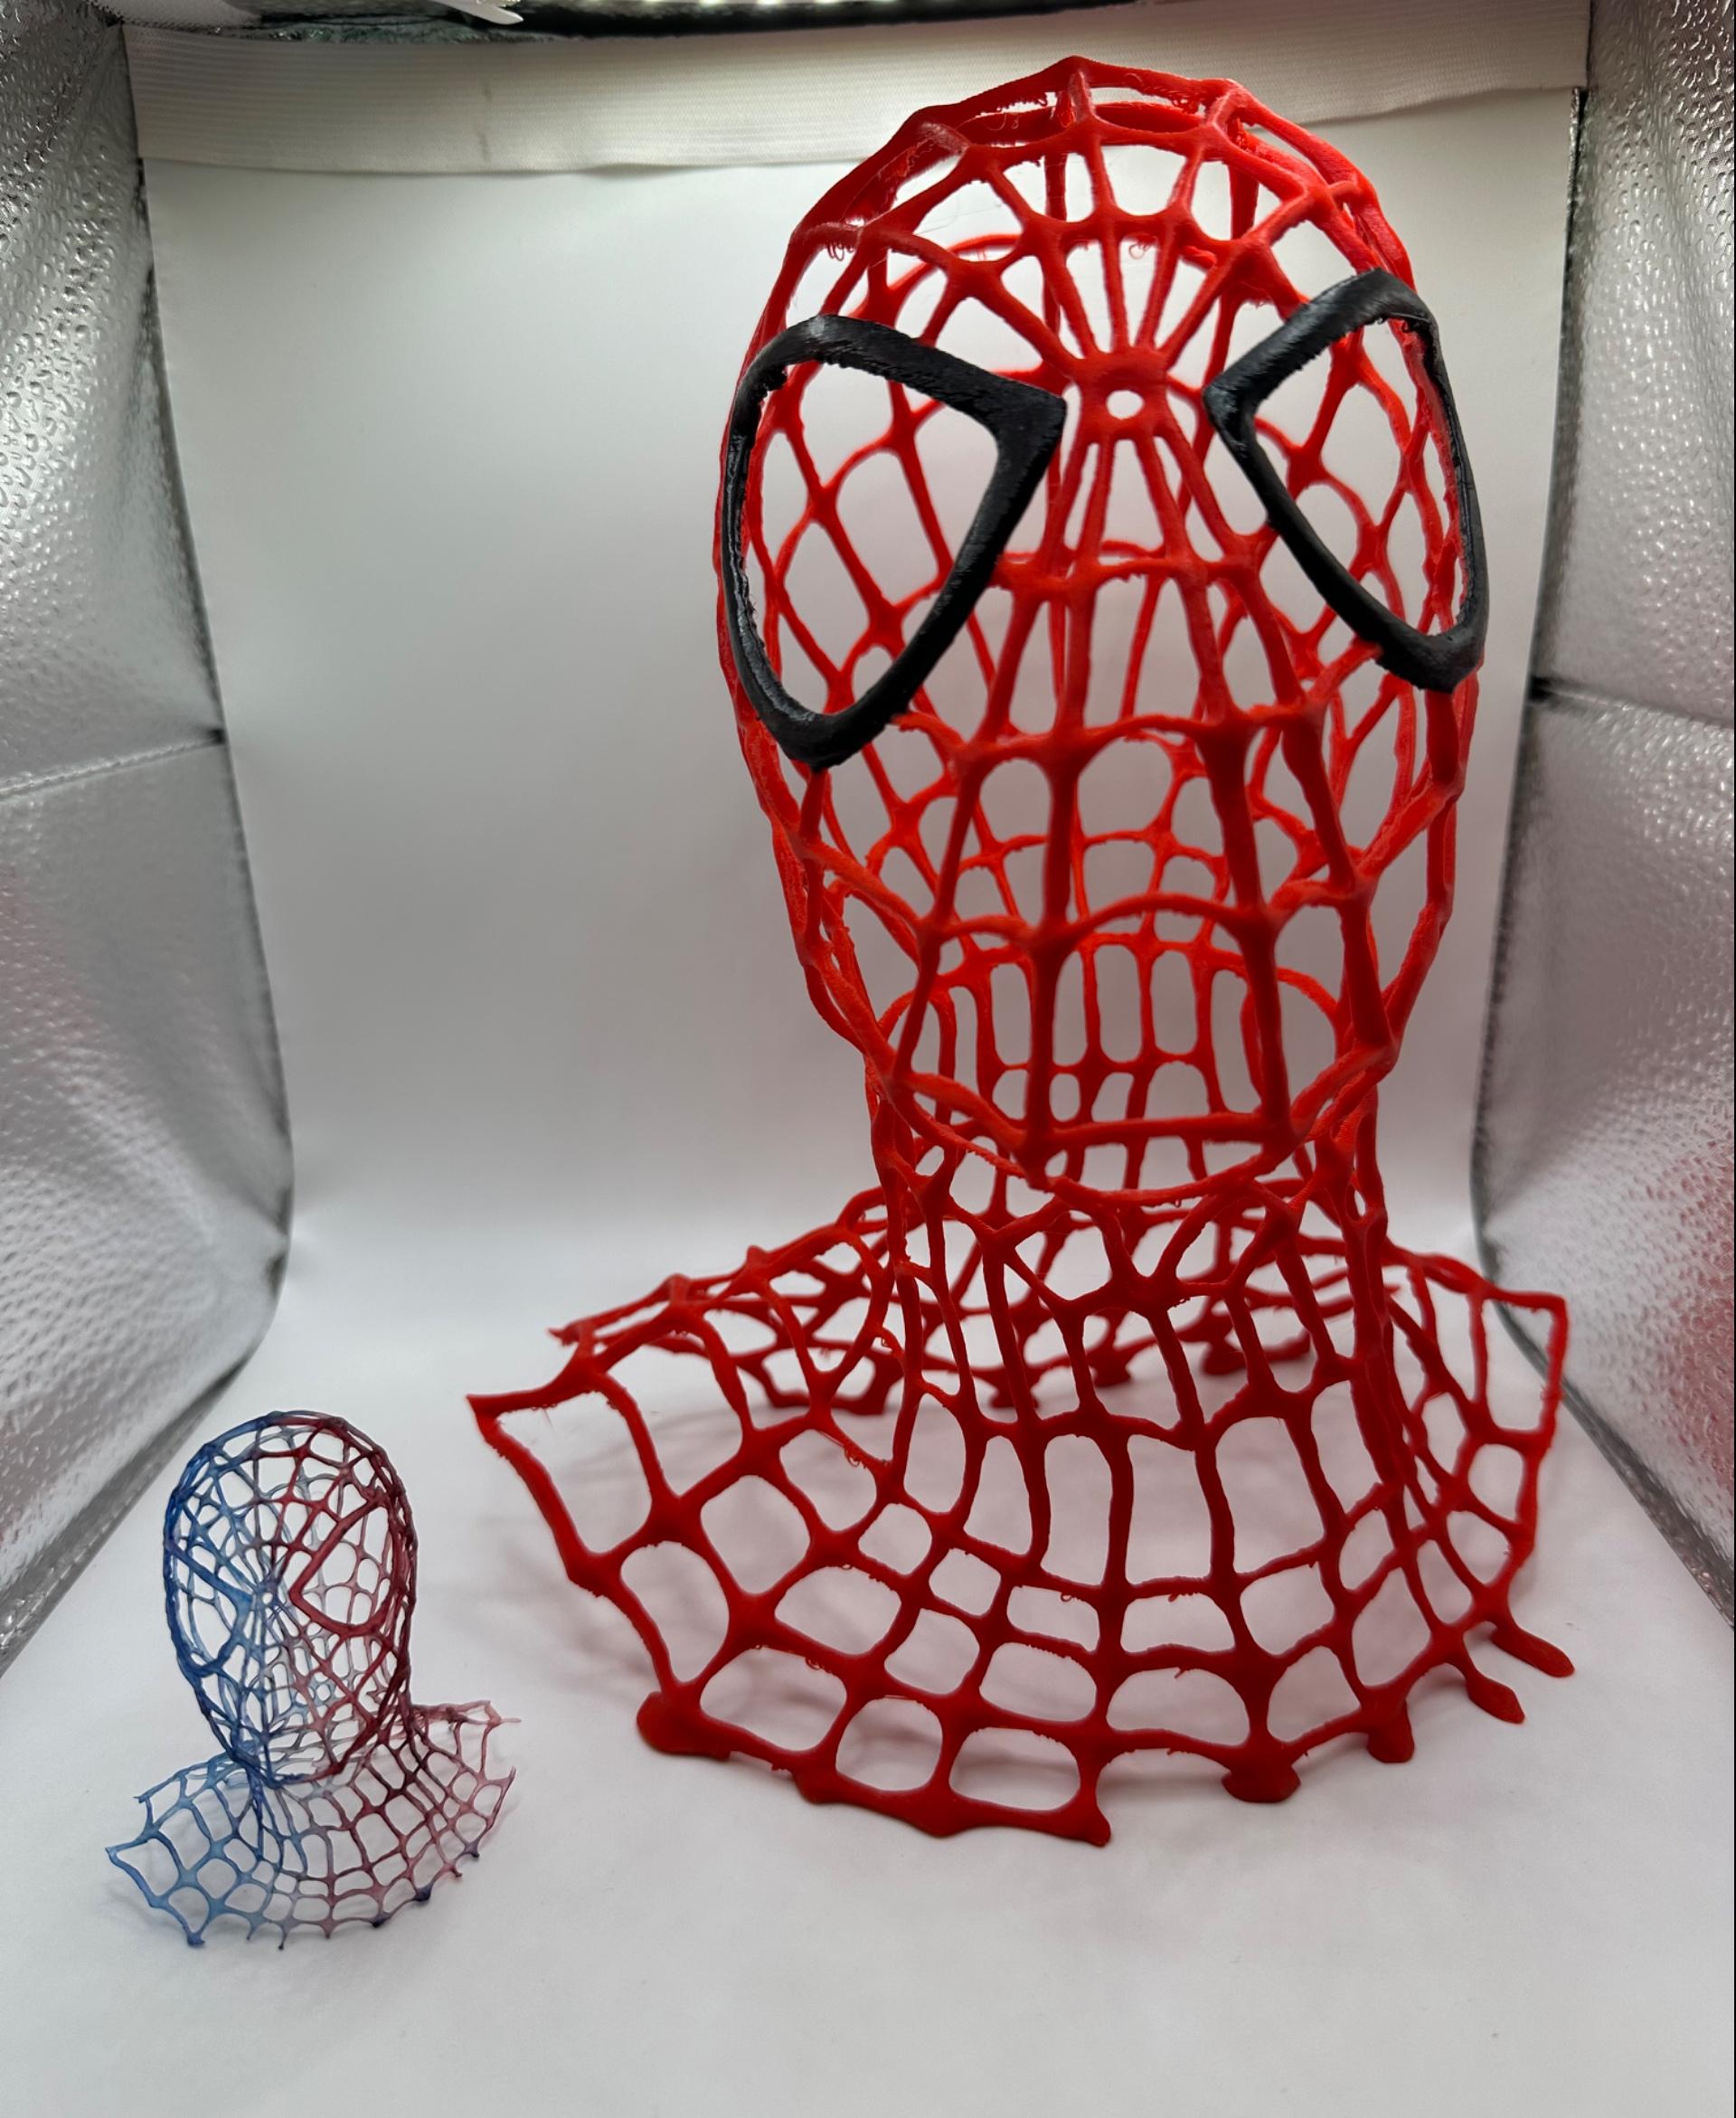 Venom Symbiotic Spider-Man Web Only. Let's Retract! - Printed 2 ways. Resin and filament. Filament scaled up to 350%. Resin I believe I scaled down to 25% and colored with alcohol inks.  - 3d model